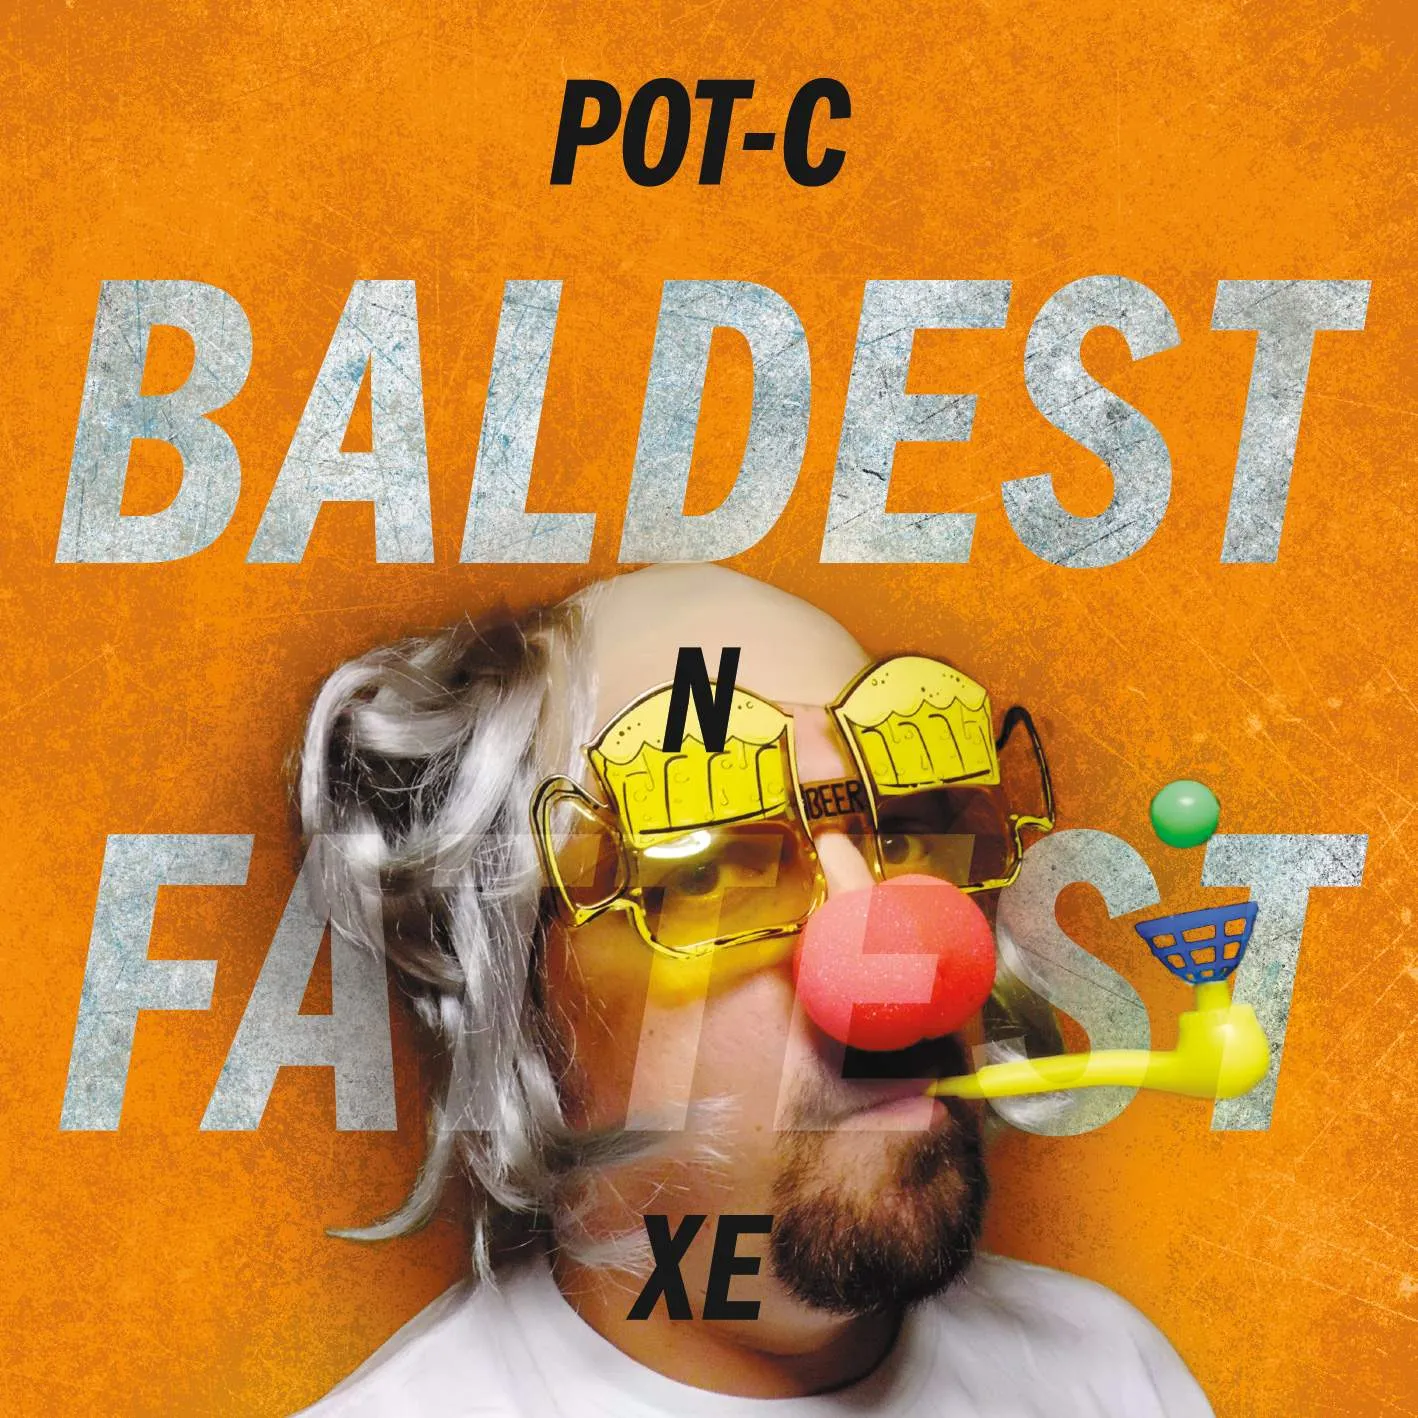 Album cover for “Baldest N Fattest XE” by Pot-C